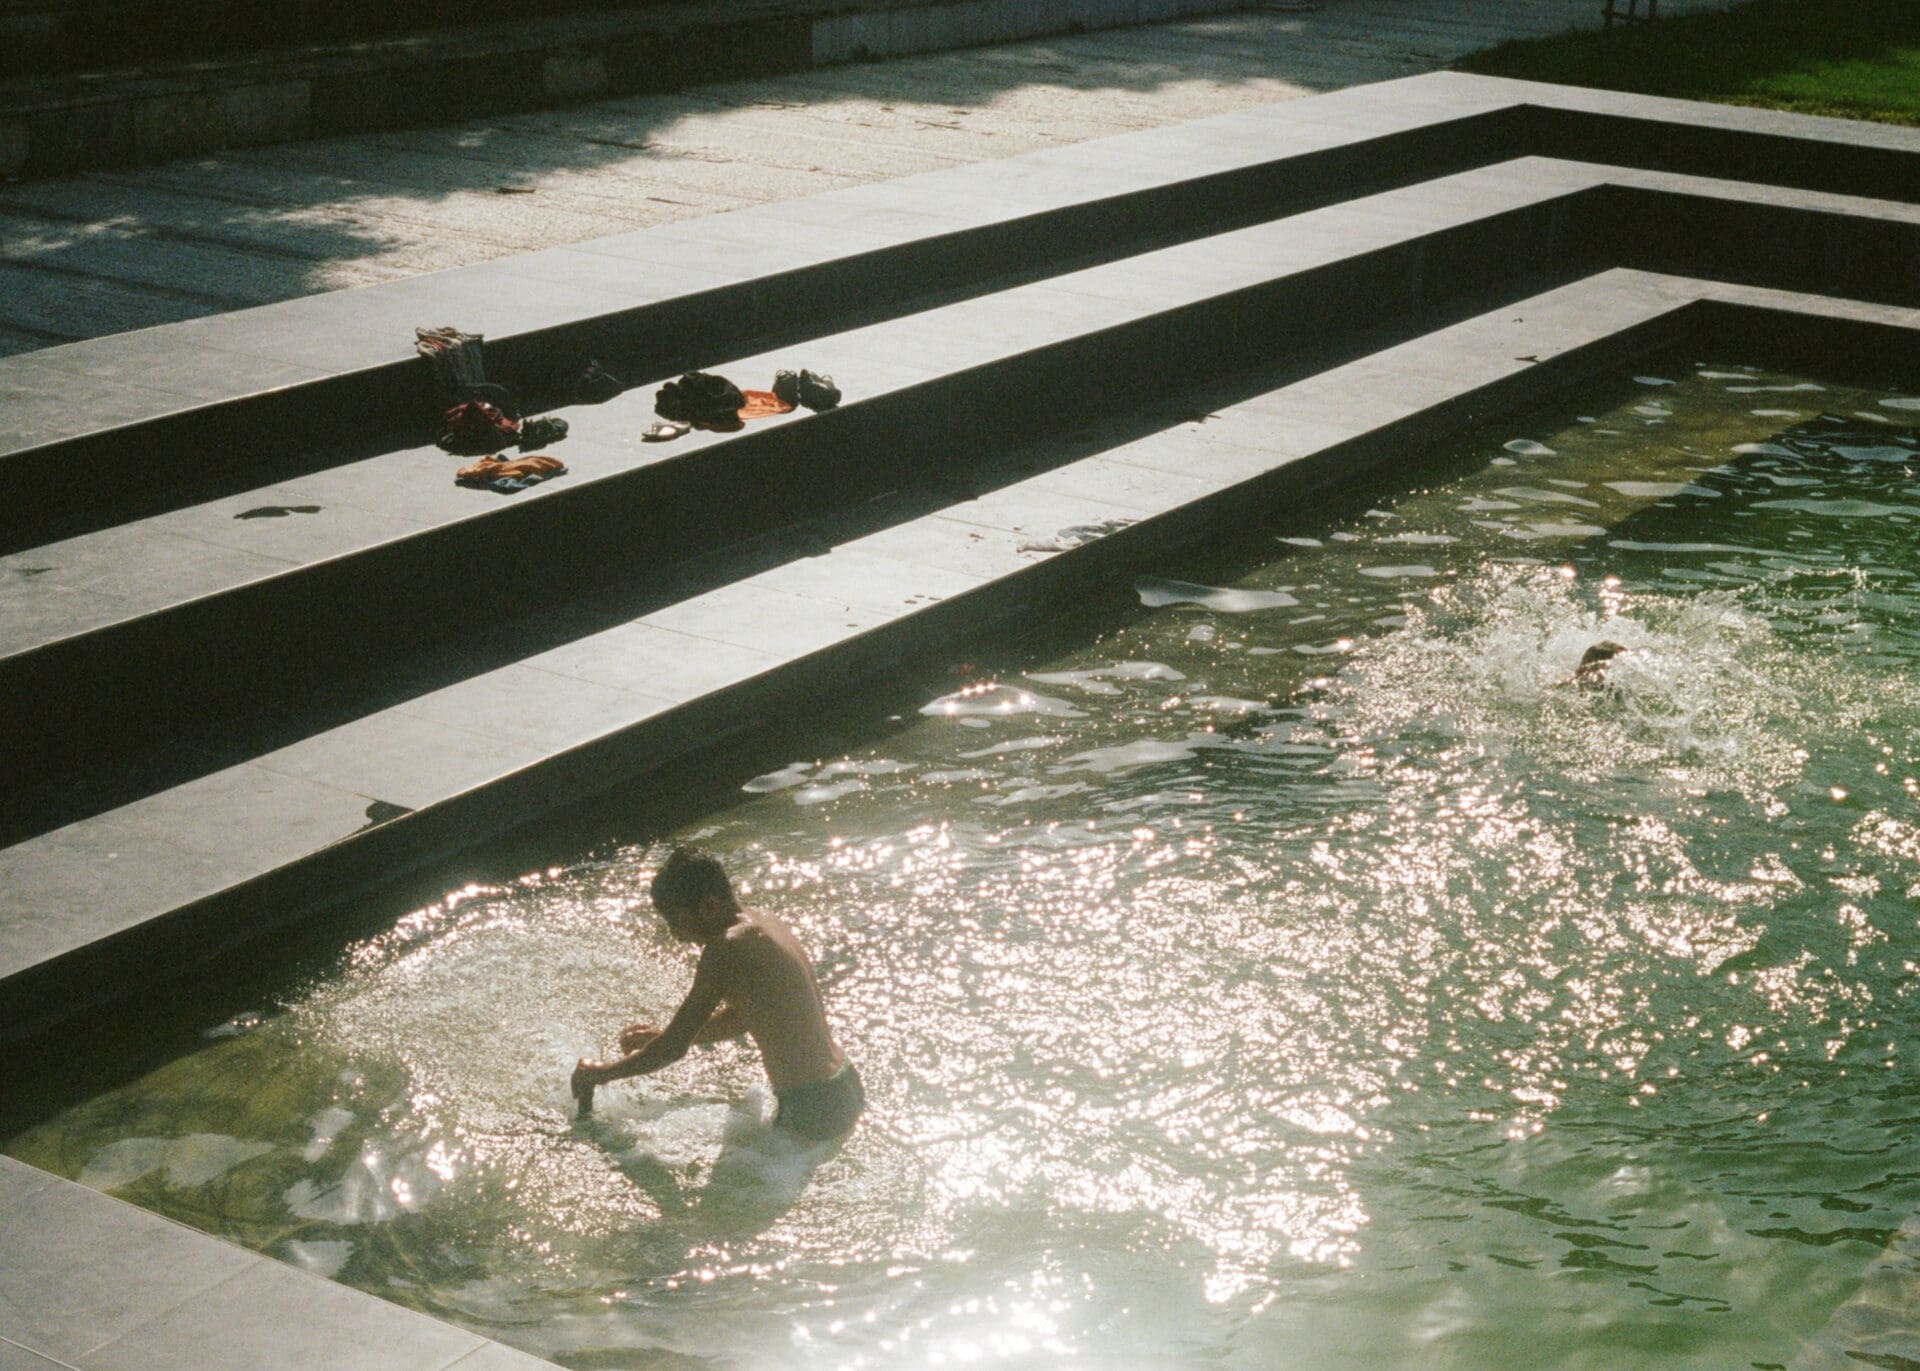 Hazel Gaskin photographs Albania | A boy plays in a rippling pool, with the sunlight flashing off the water's surface